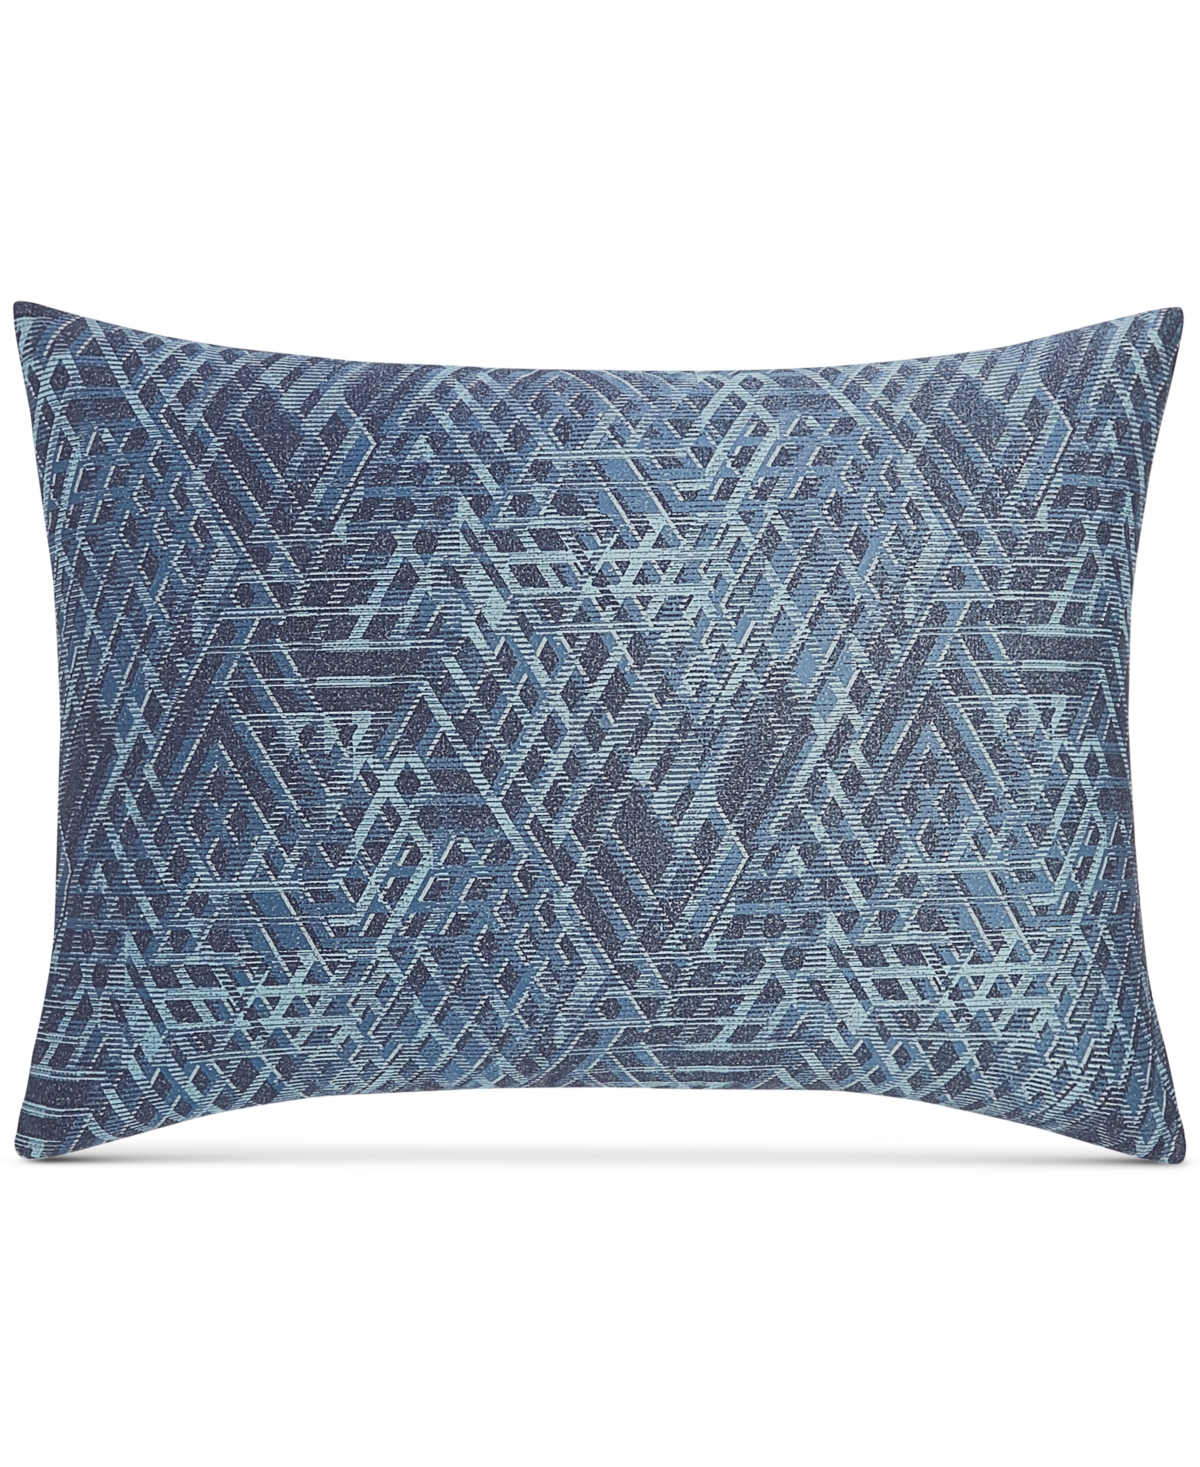 Closeout! Hotel Collection Composite Geometric Sham, King, Created for Macy's - Indigo